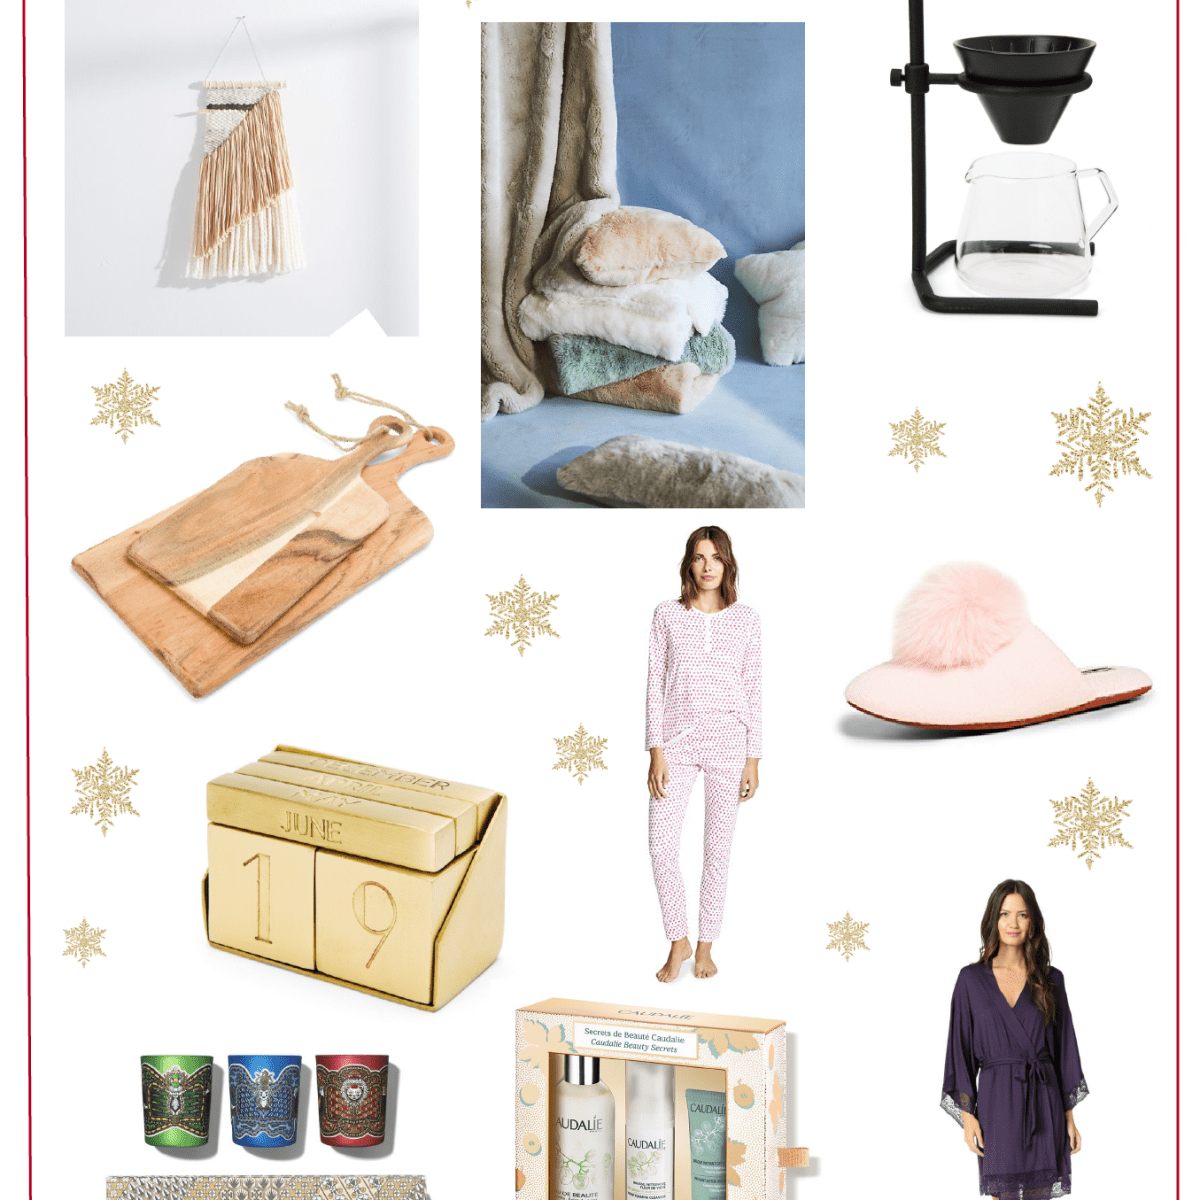 Gift Guide: For the Best Friend Who Has Everything - Cupcakes & Cashmere